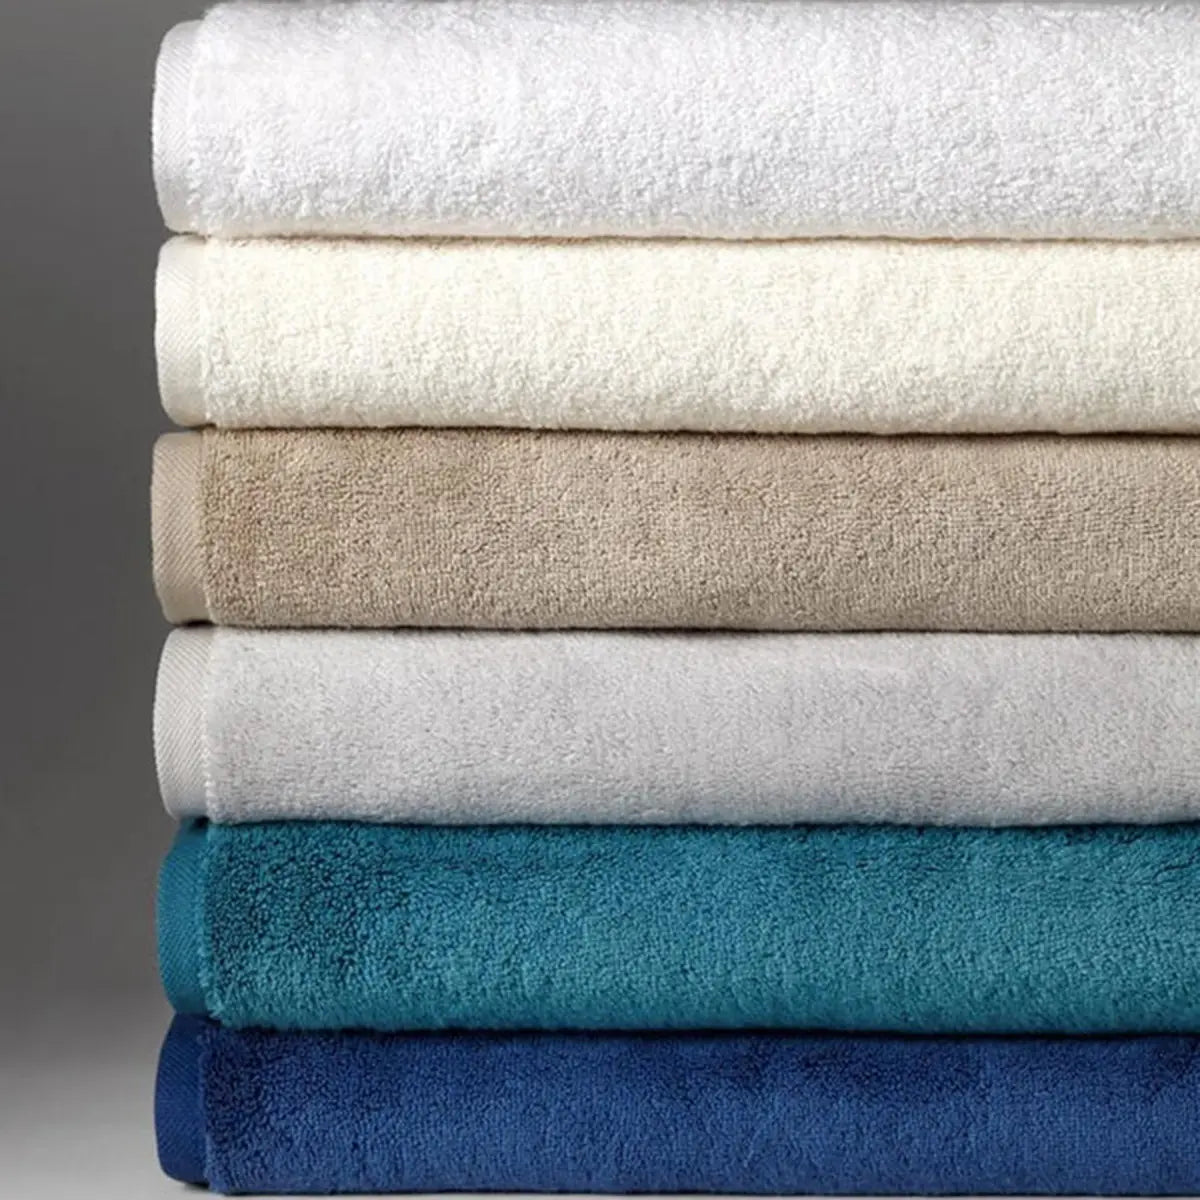 Sferra Sarma Bath Towel in Various Color stacked together